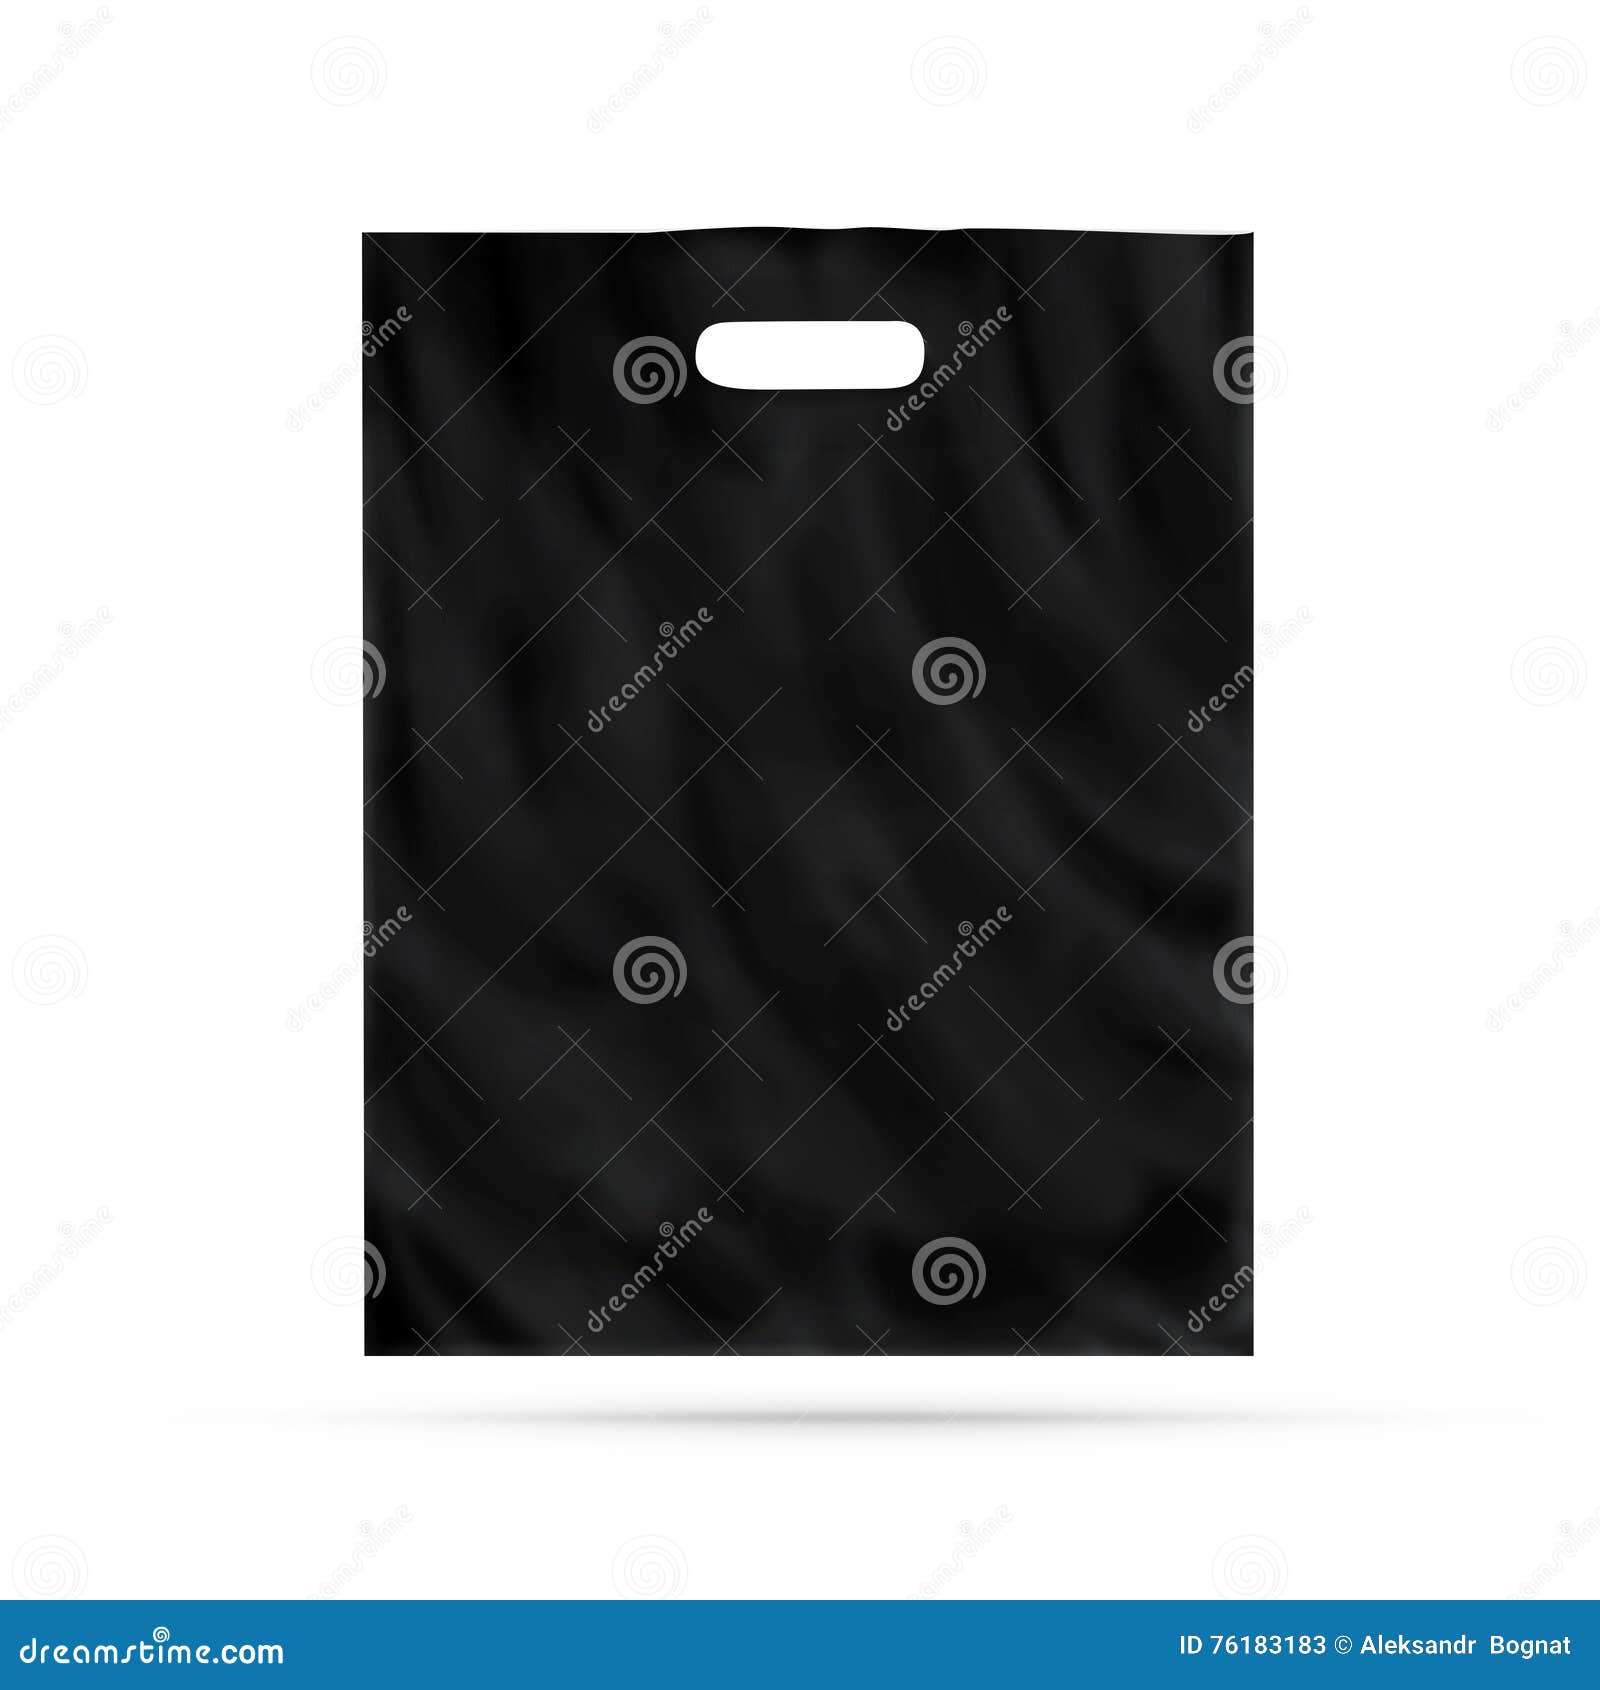 Download Blank Plastic Bag Mock Up Isolated. Empty Black ...